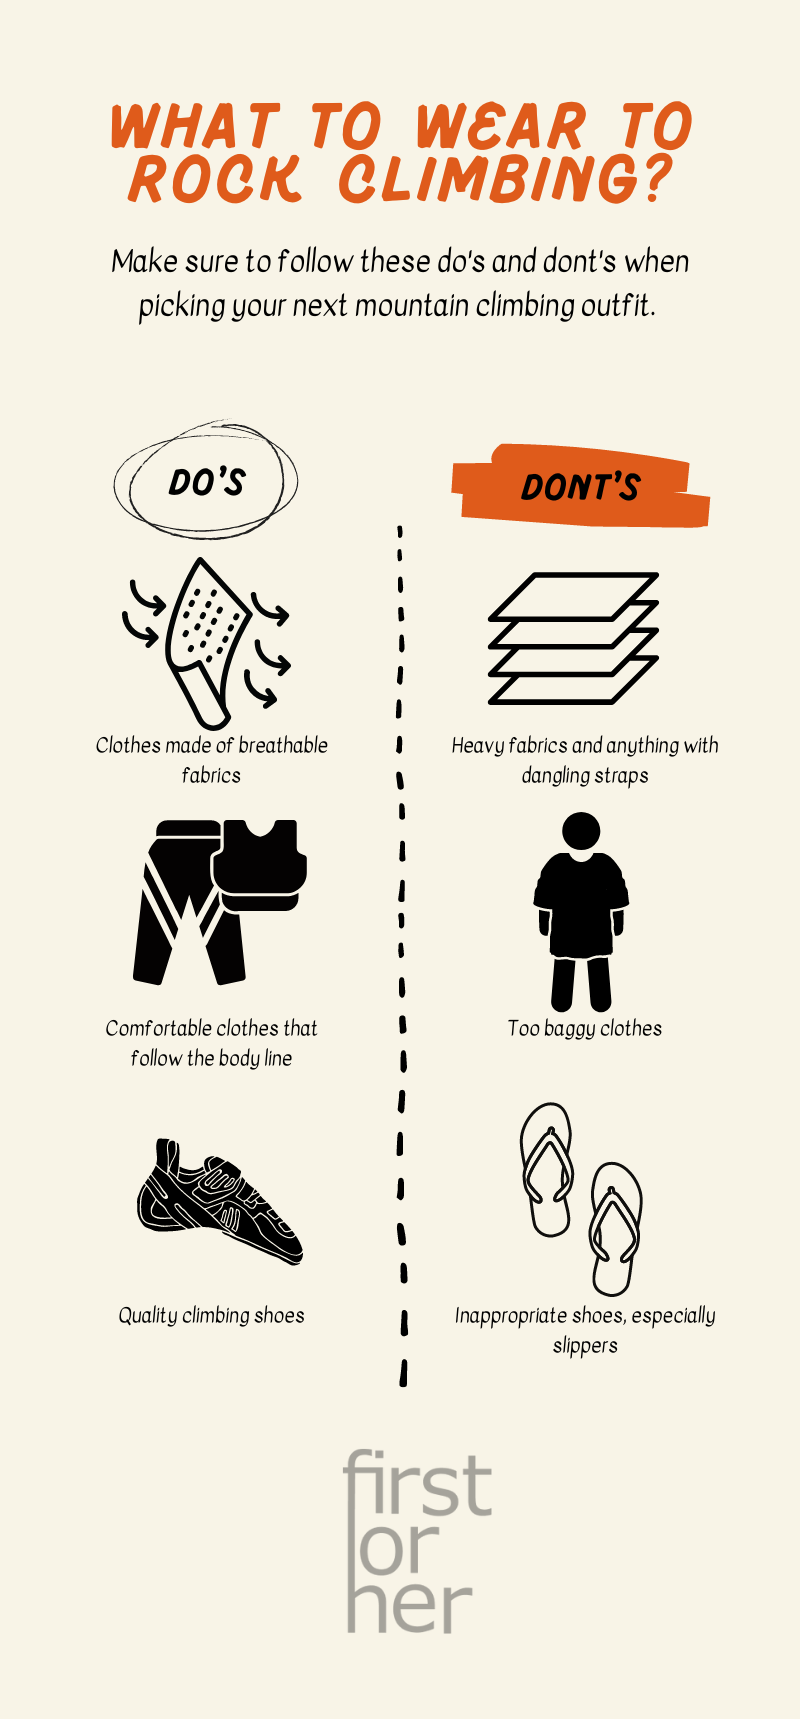 What to Wear to Rock Climbing - Dos and Donts - Firstforhers